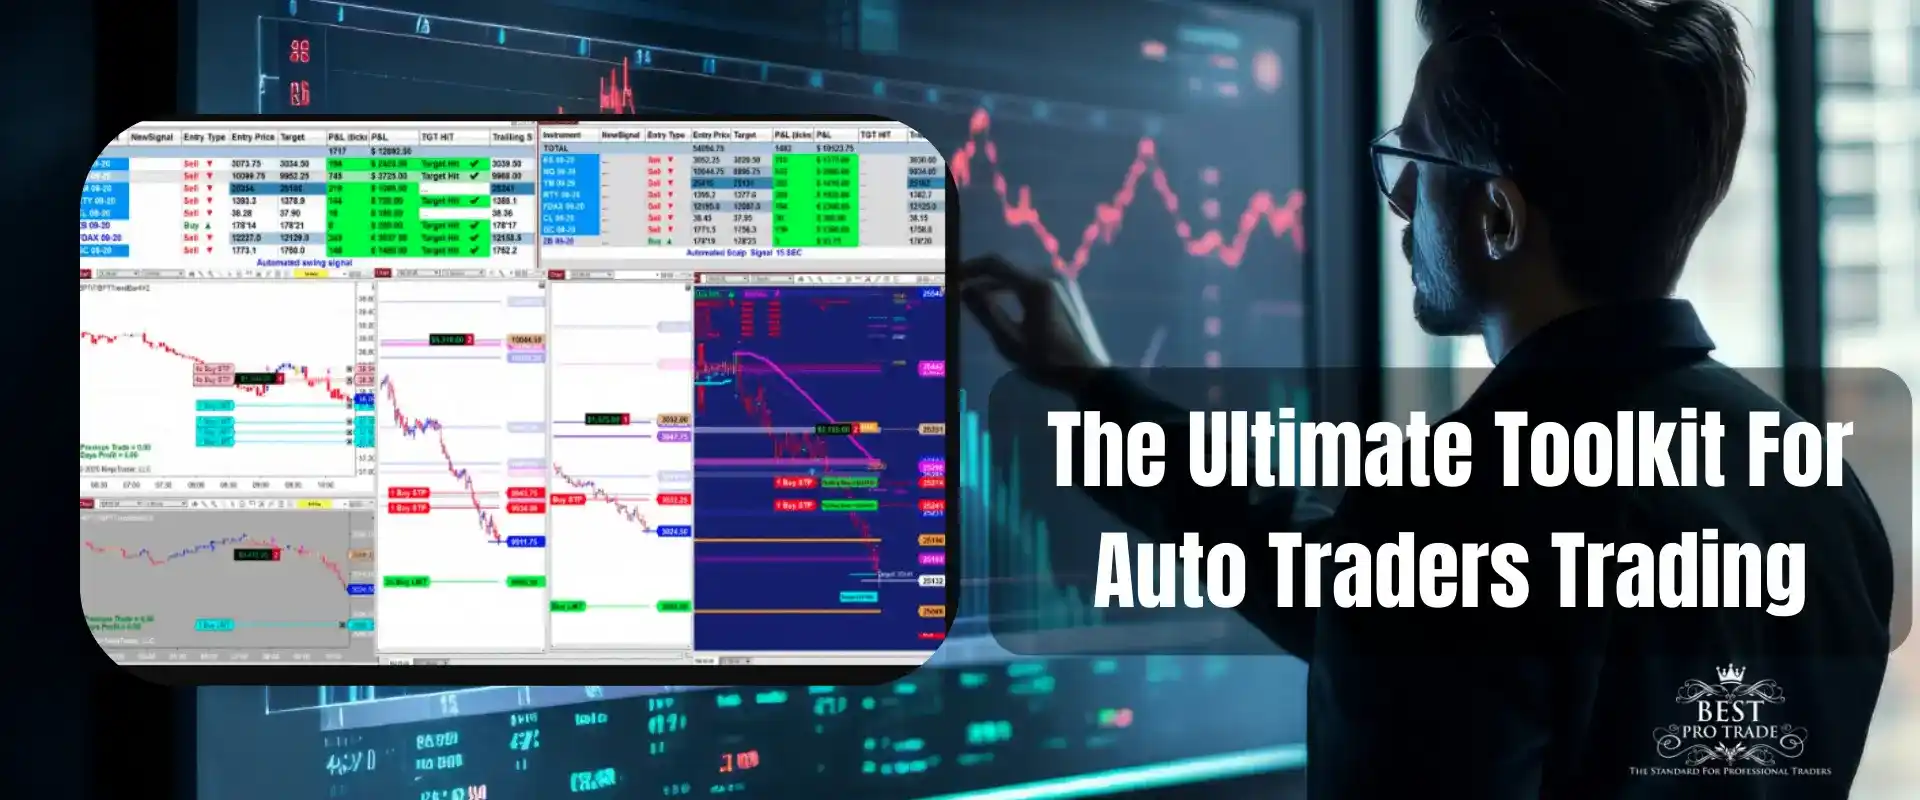 Auto Traders Trading